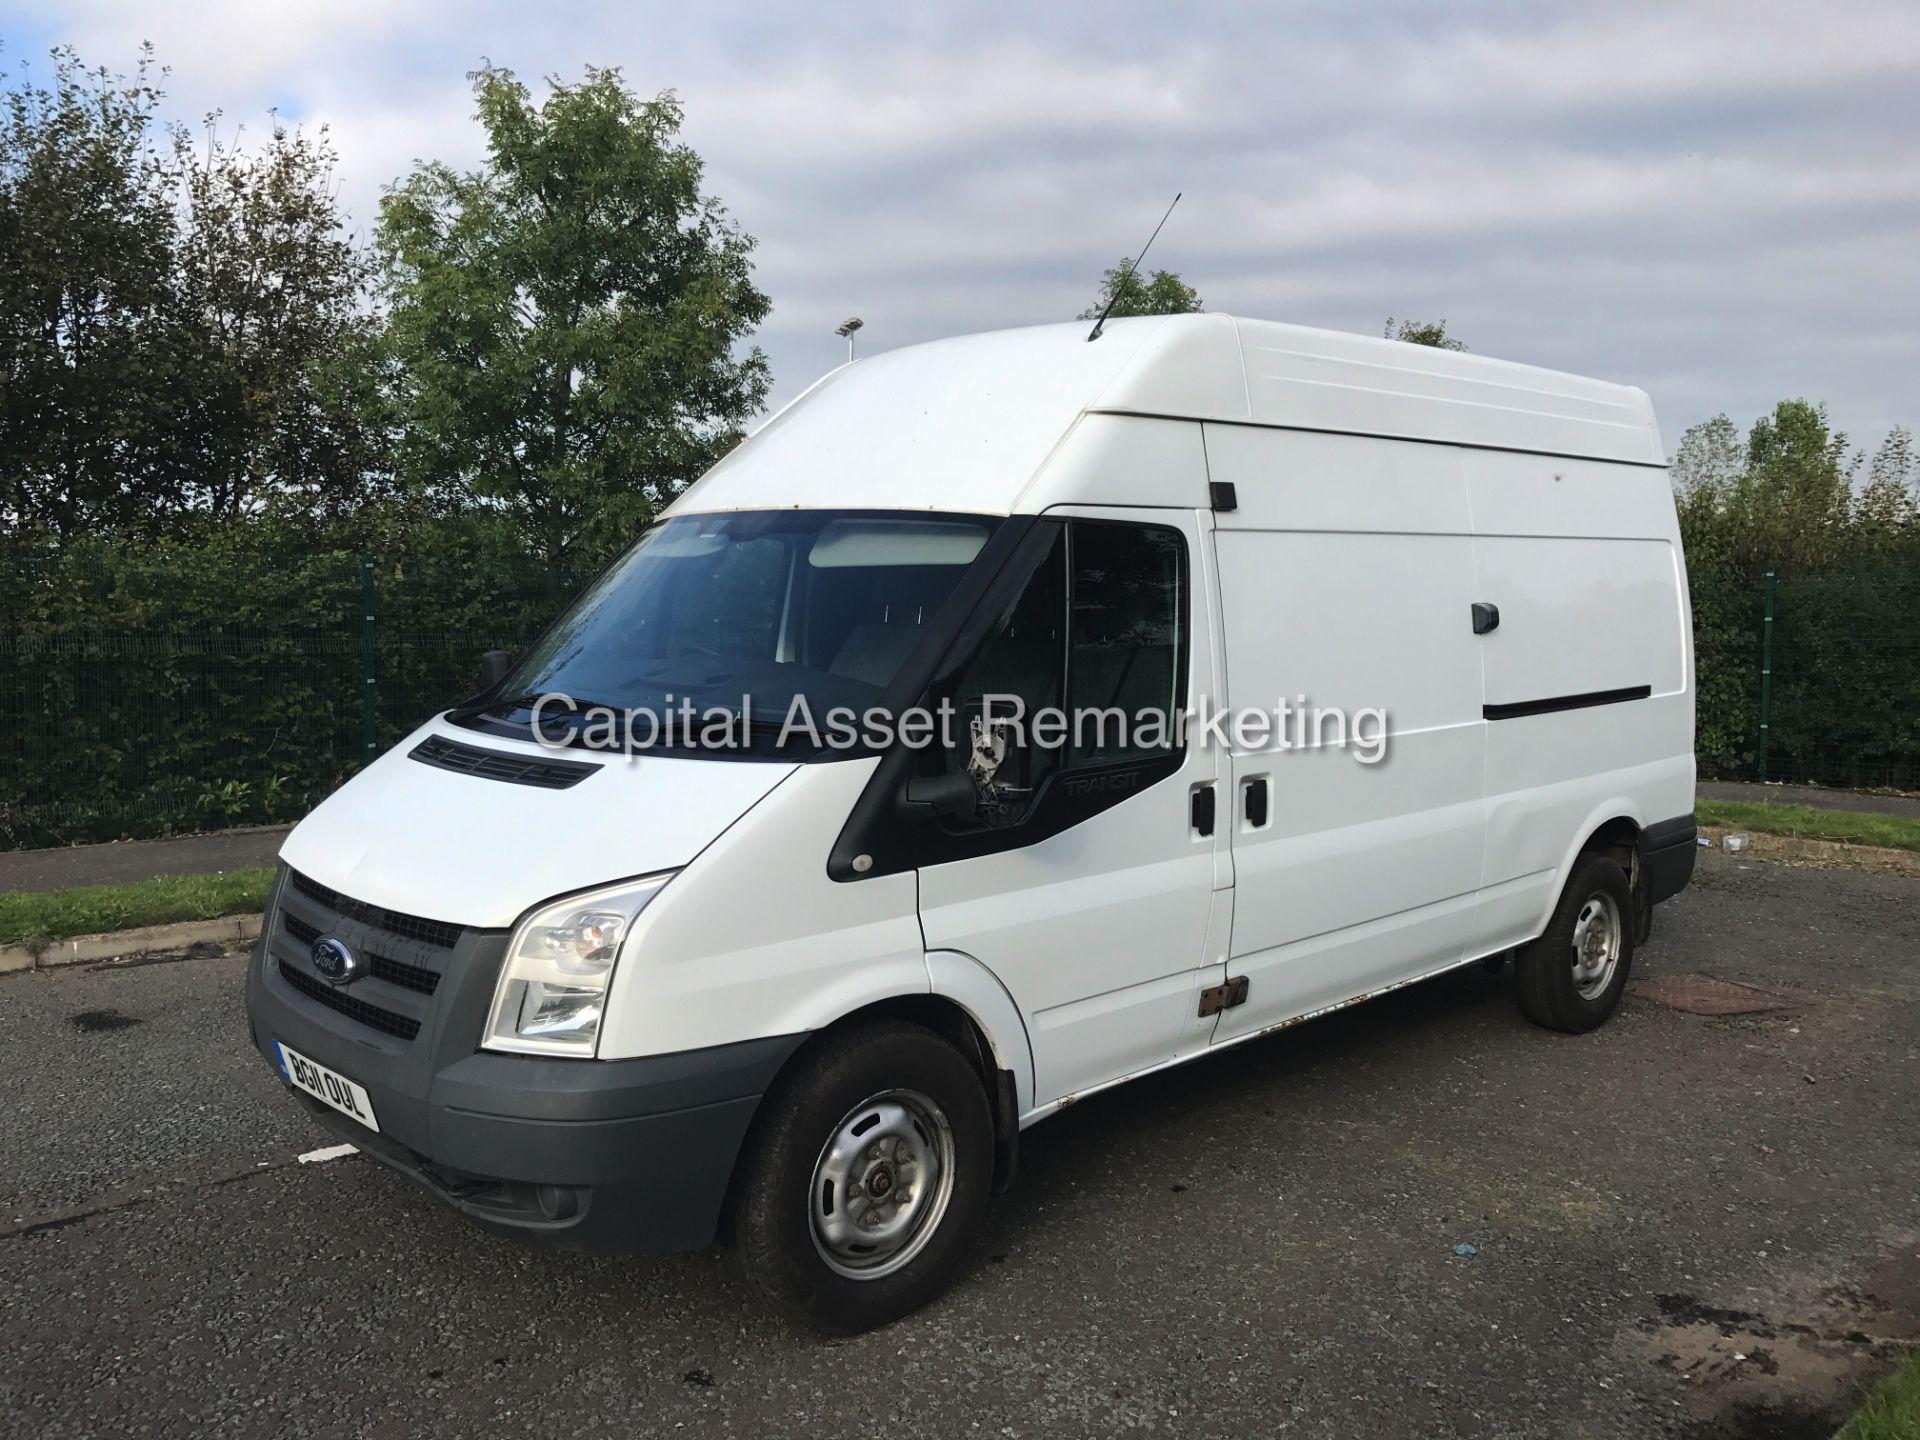 (ON SALE)FORD TRANSIT 2.4TDCI "115PSI / 6 SPEED" T350 - LWB / HIGH TOP (11 REG) LOW MILEAGE - - Image 3 of 18